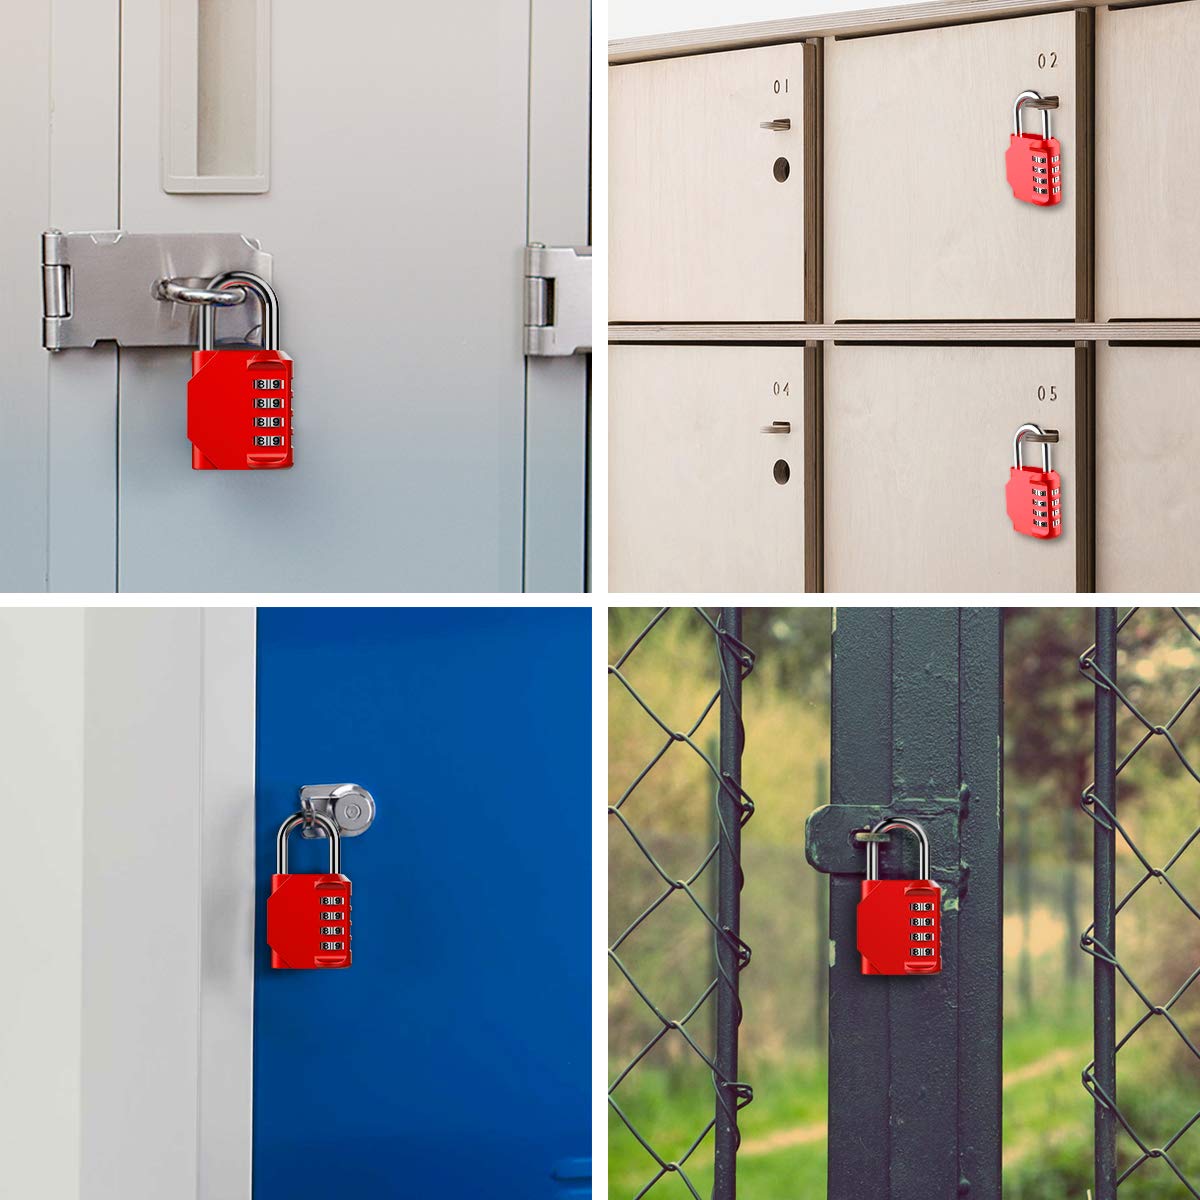 TH001RN 1 Pack 1.3 Inch Combination Lock, Red – Puroma